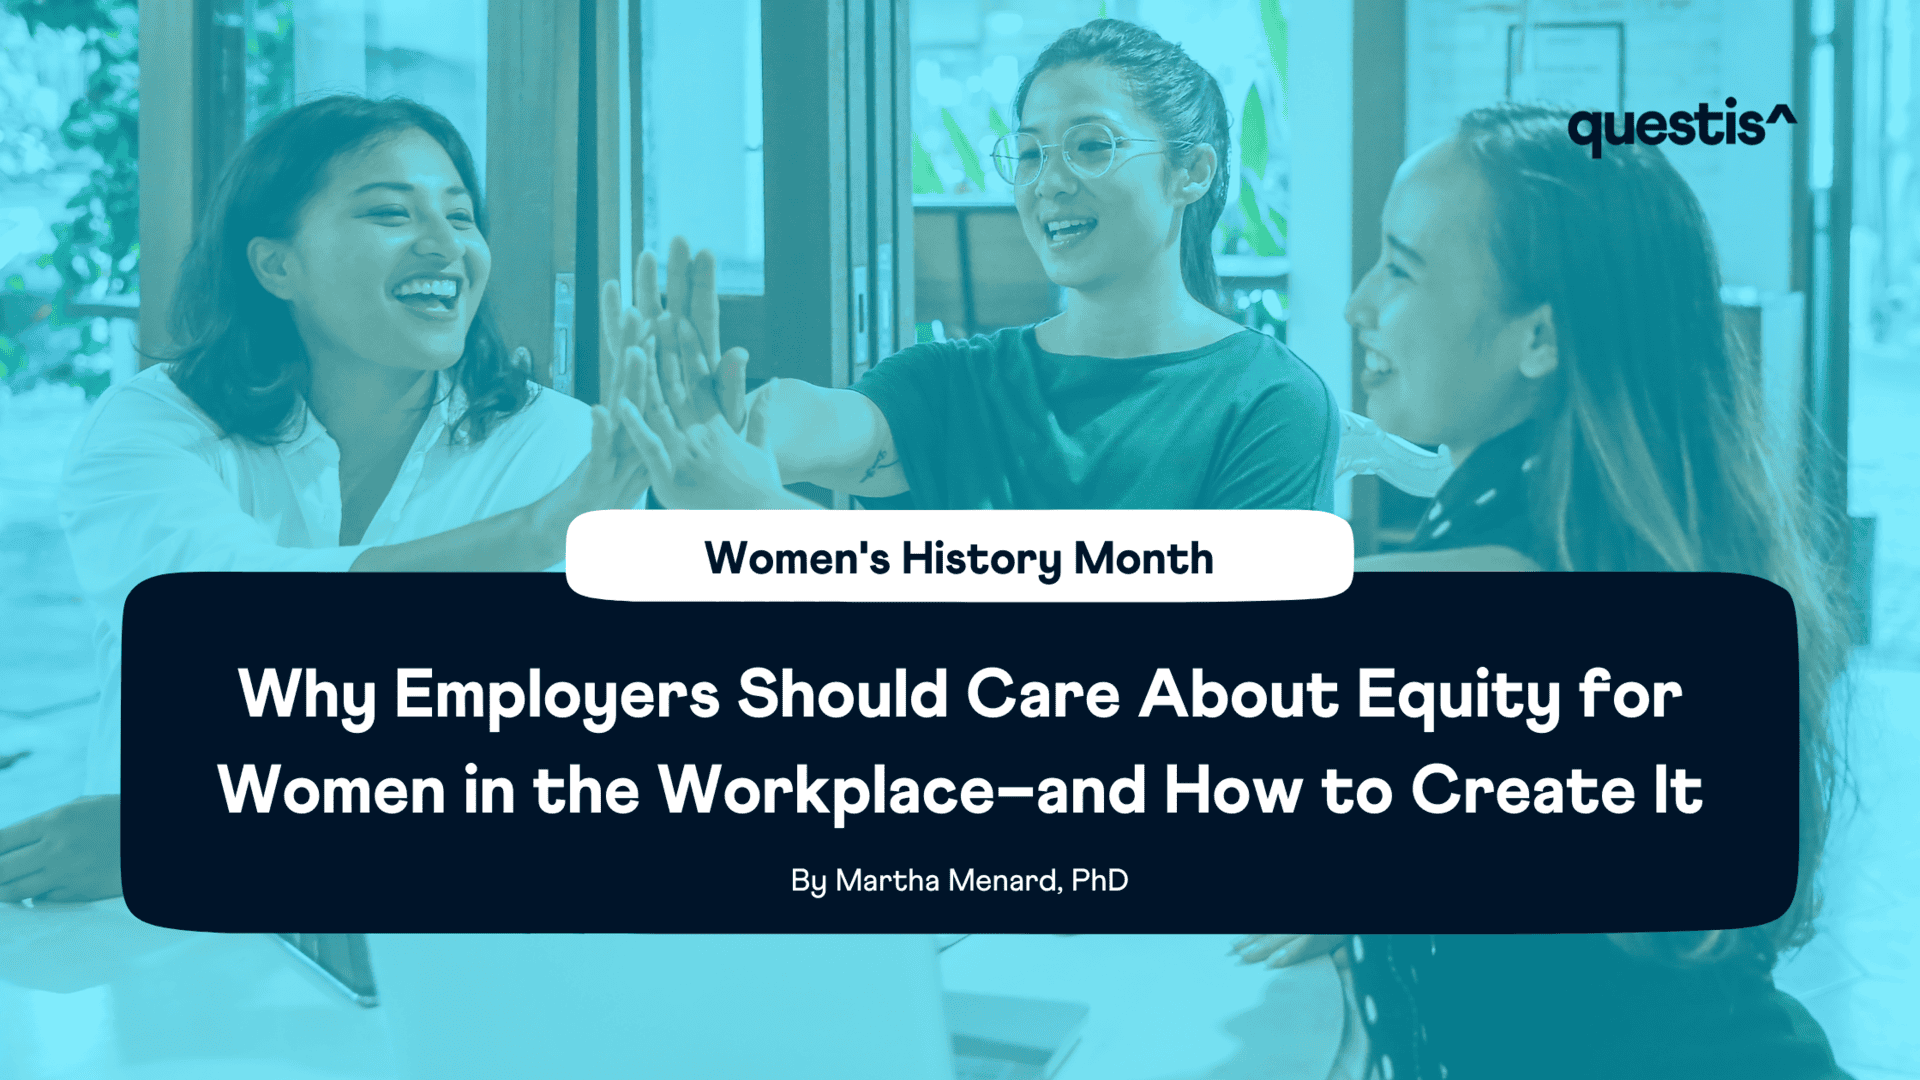 Why Employers Should Care About Equity for Women in the Workplace–and How to Create It